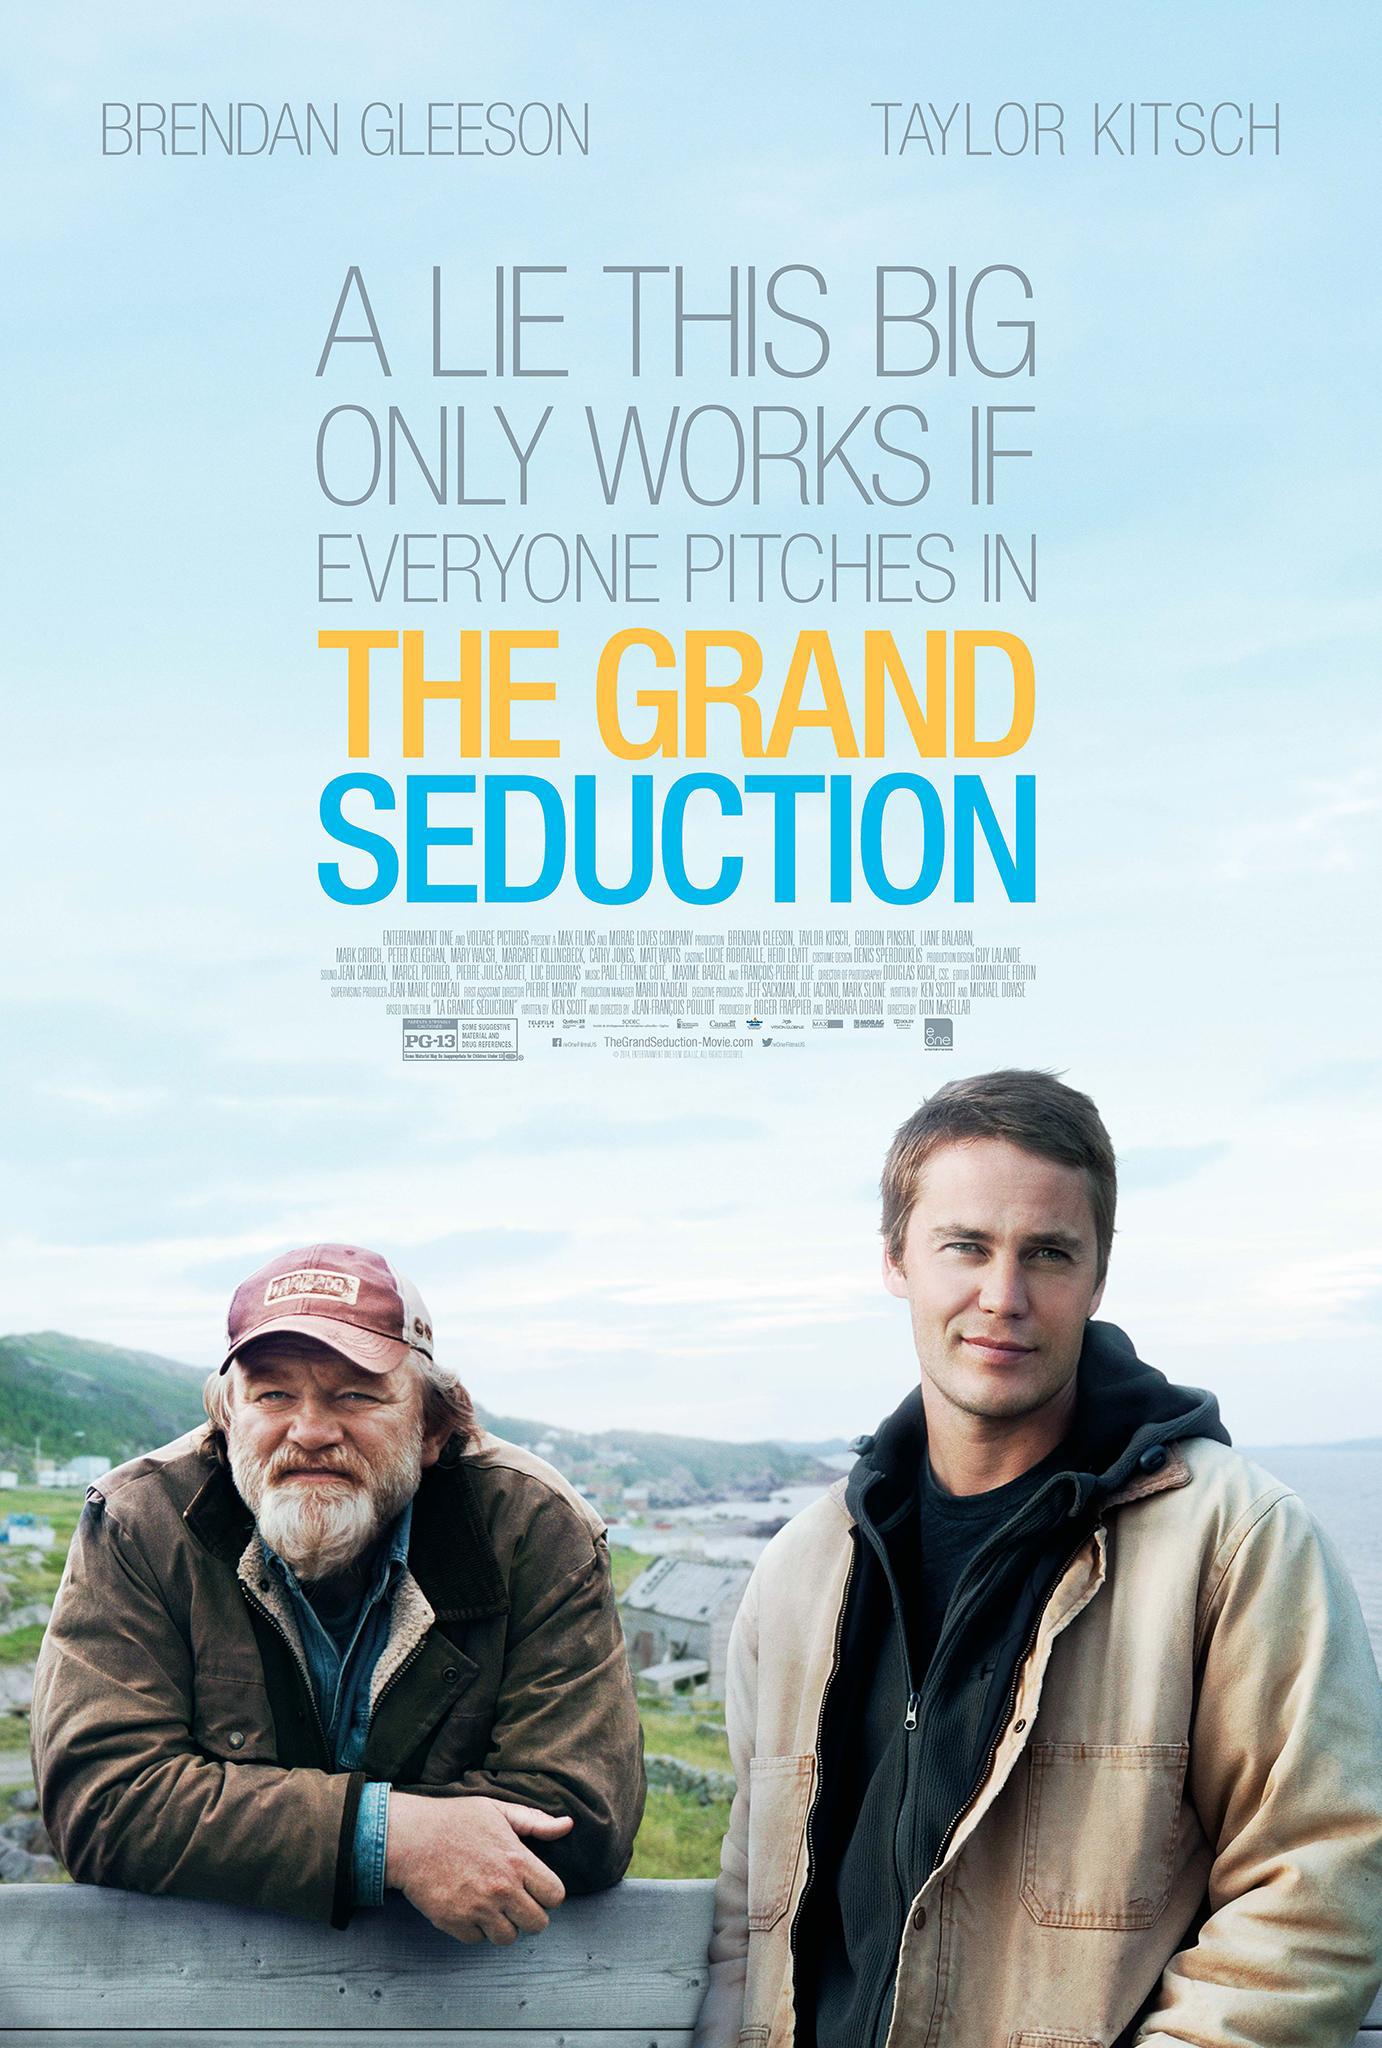 The Grand Seduction Movie Review